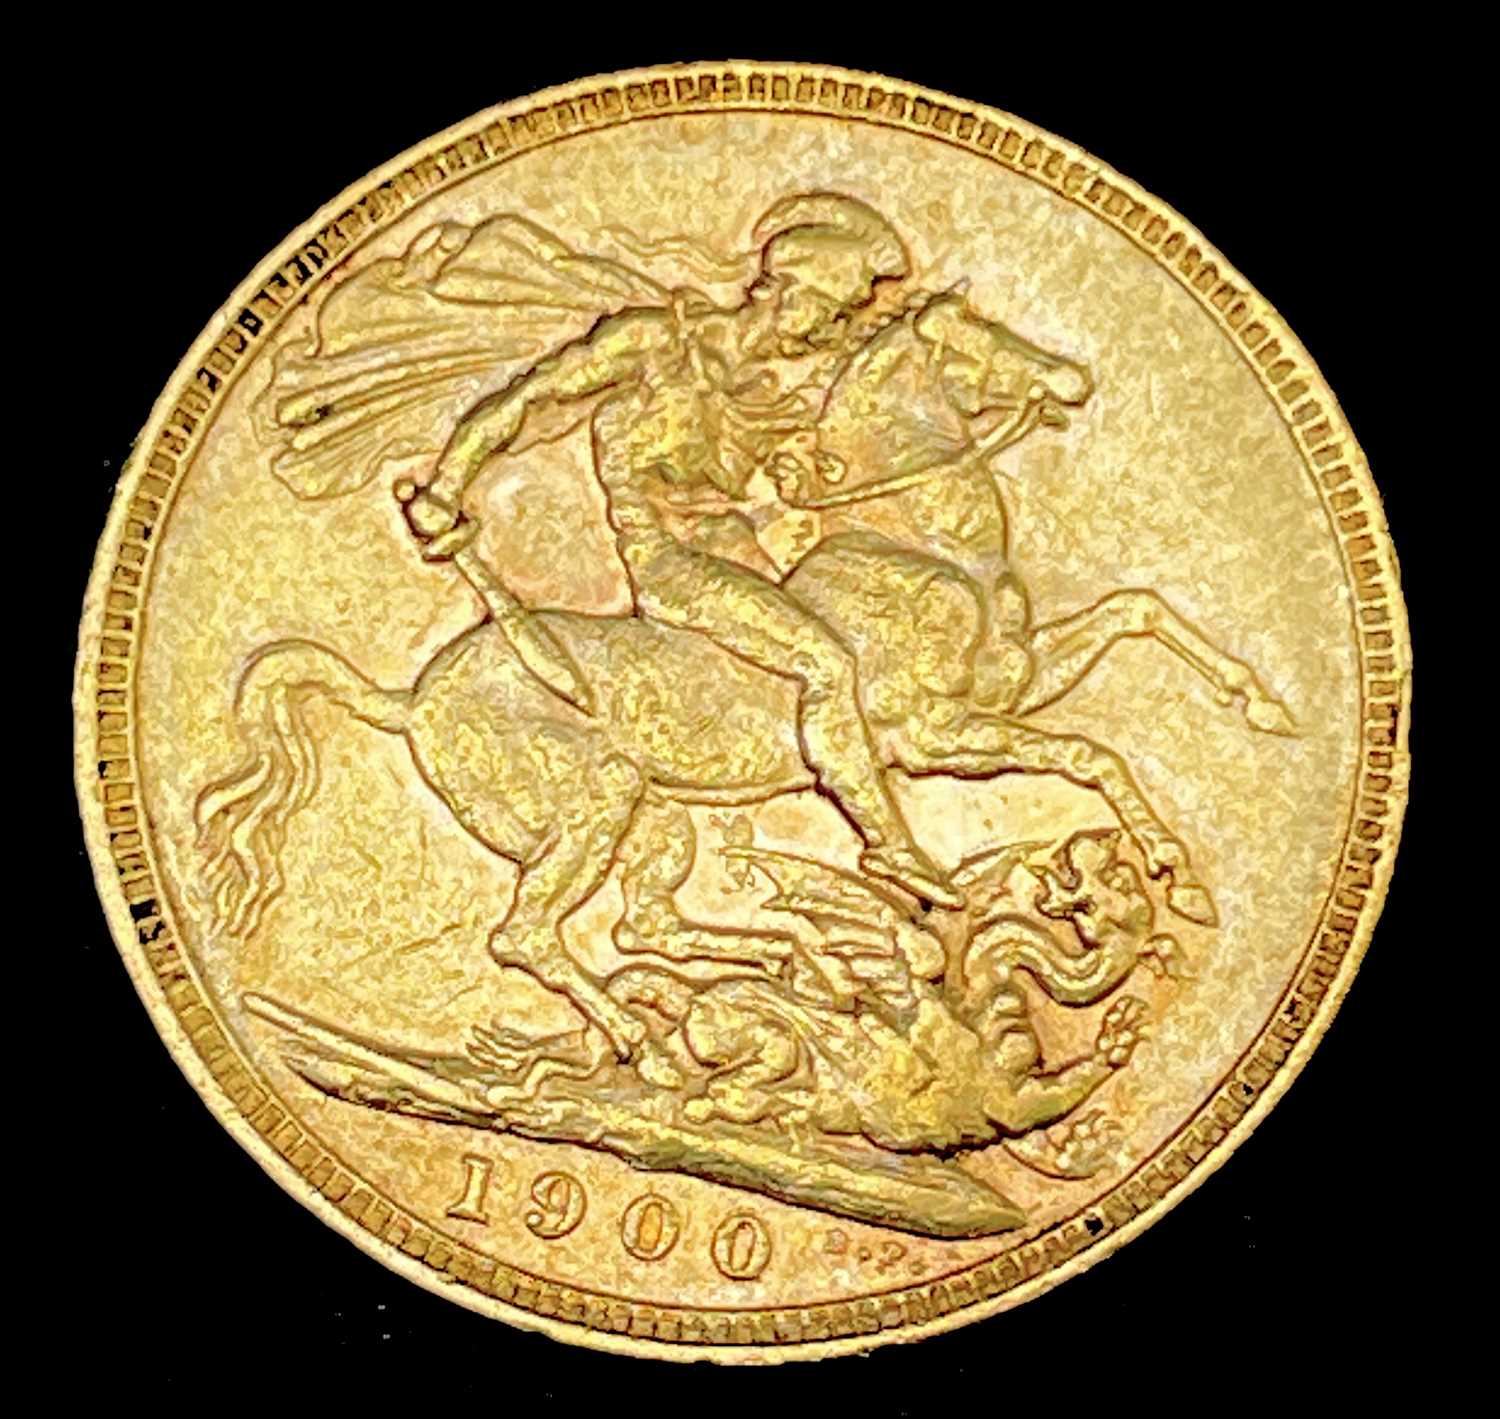 Lot 22 - Great Britain Gold Sovereign 1900 Veiled Head